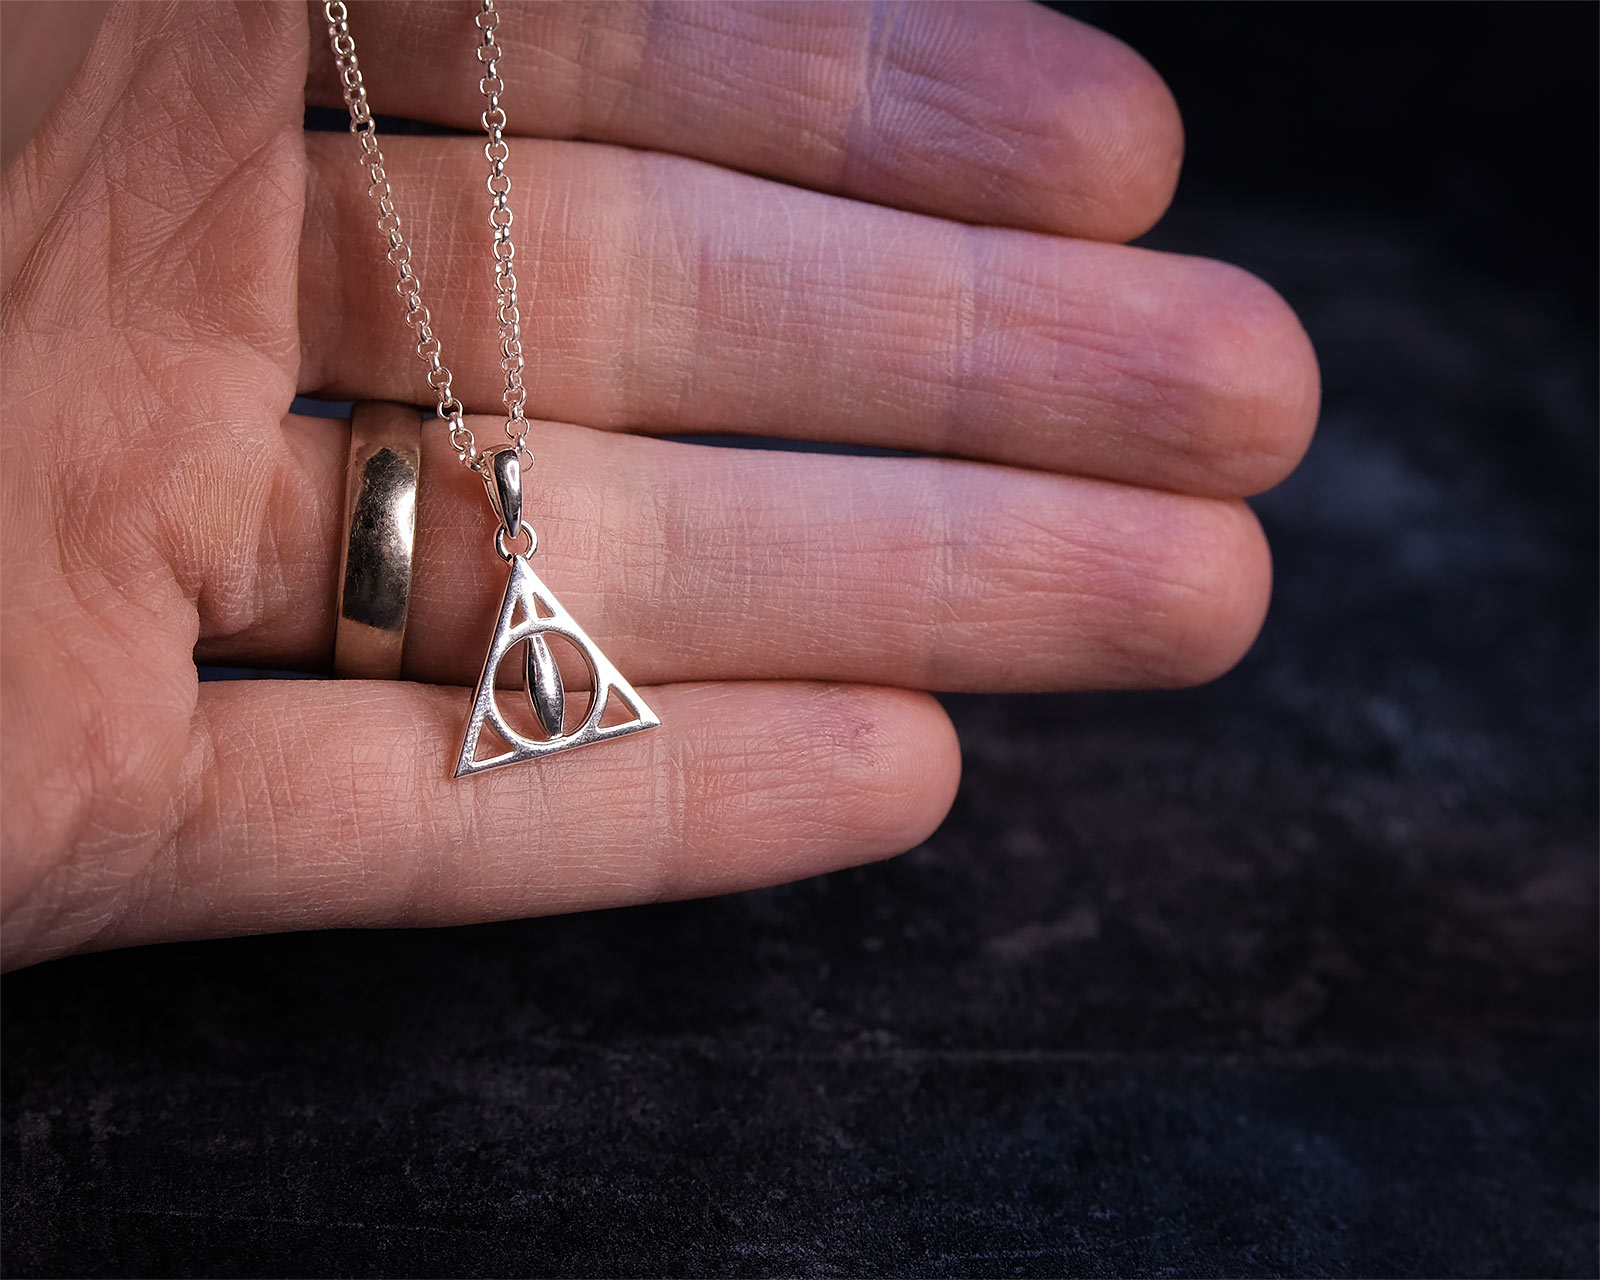 Harry Potter - Deathly Hallows Necklace